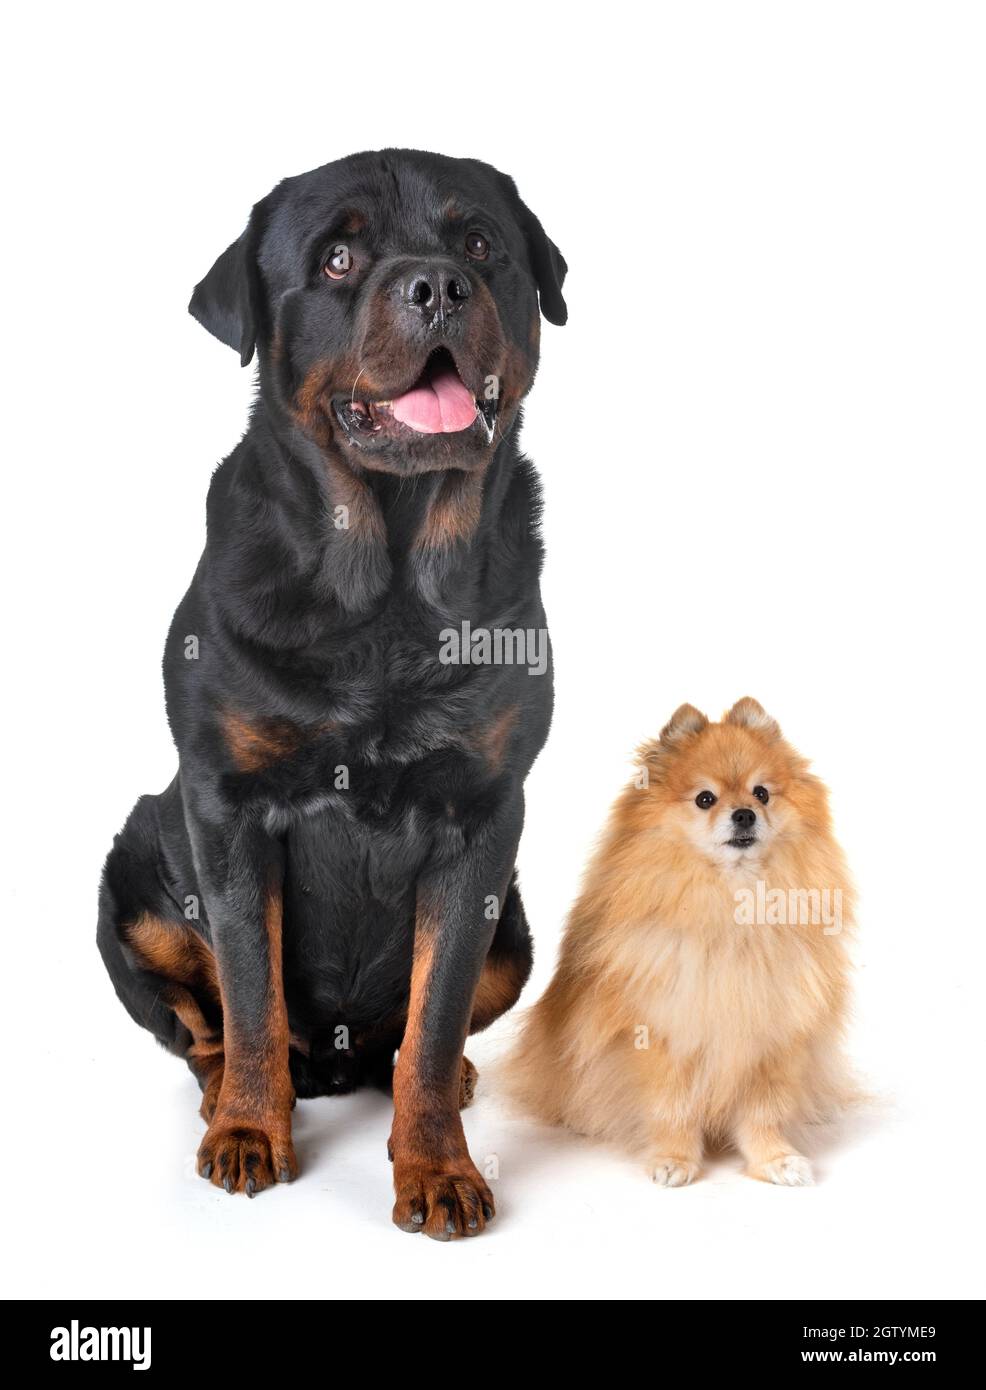 Portrait Of Dogs Sitting Against White Background Stock Photo